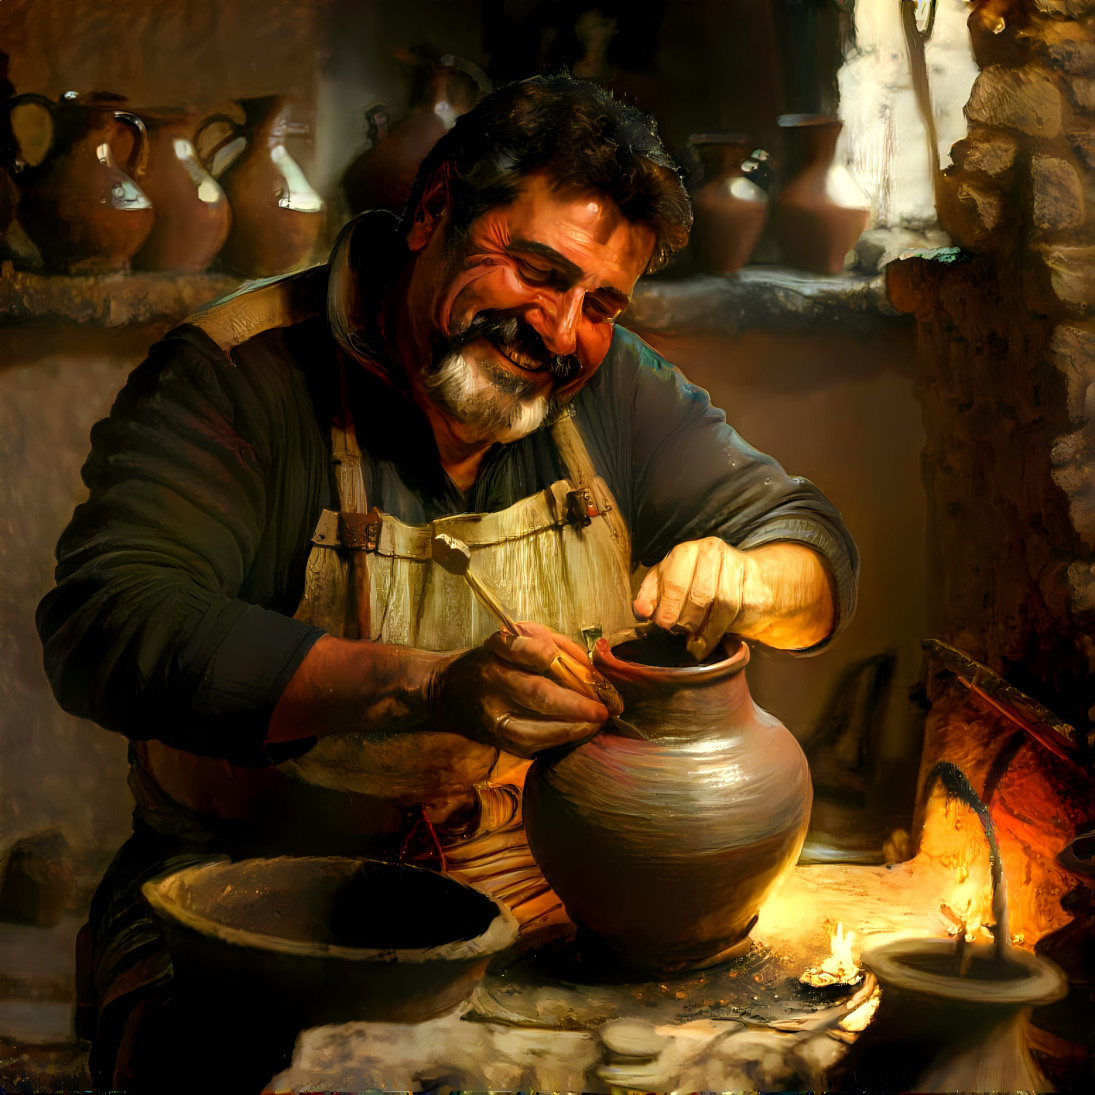 Greek potterymaker, in the style of Rembrandt